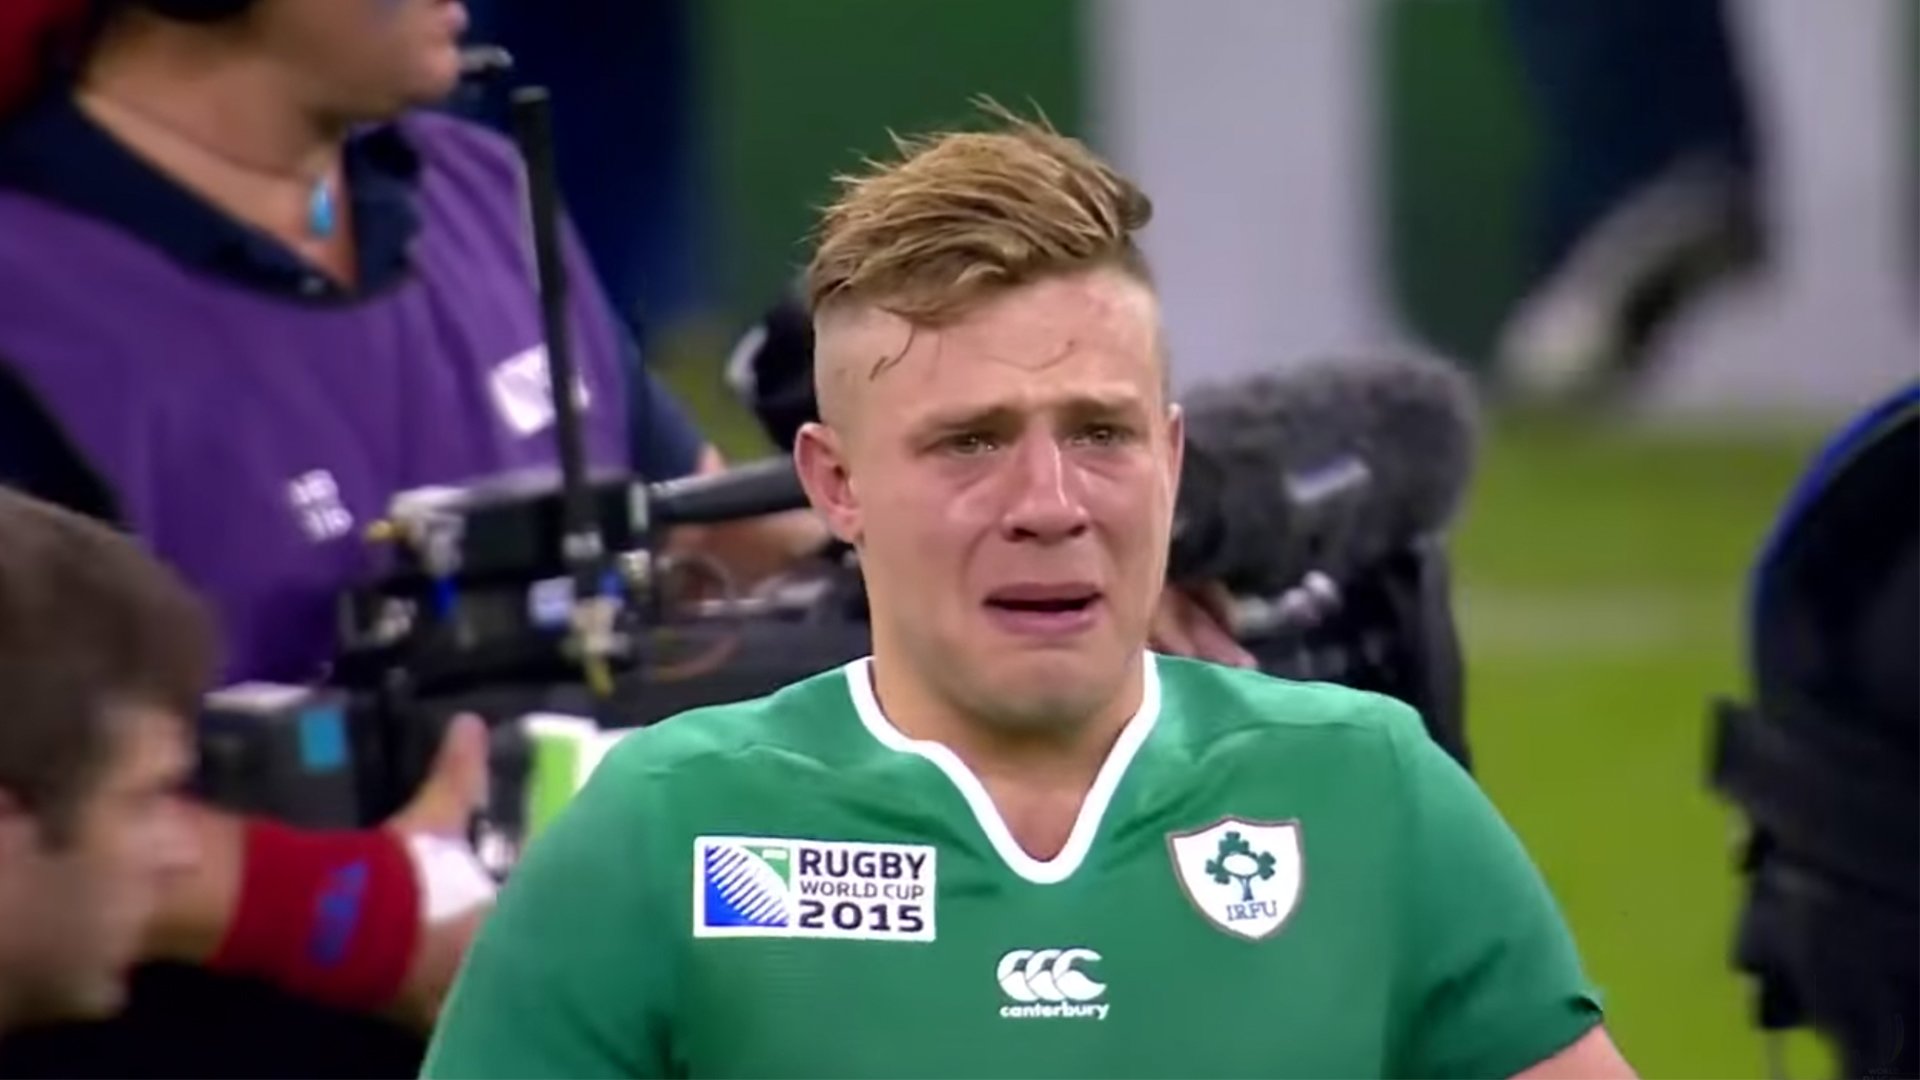 What's the most painful Ireland defeat?